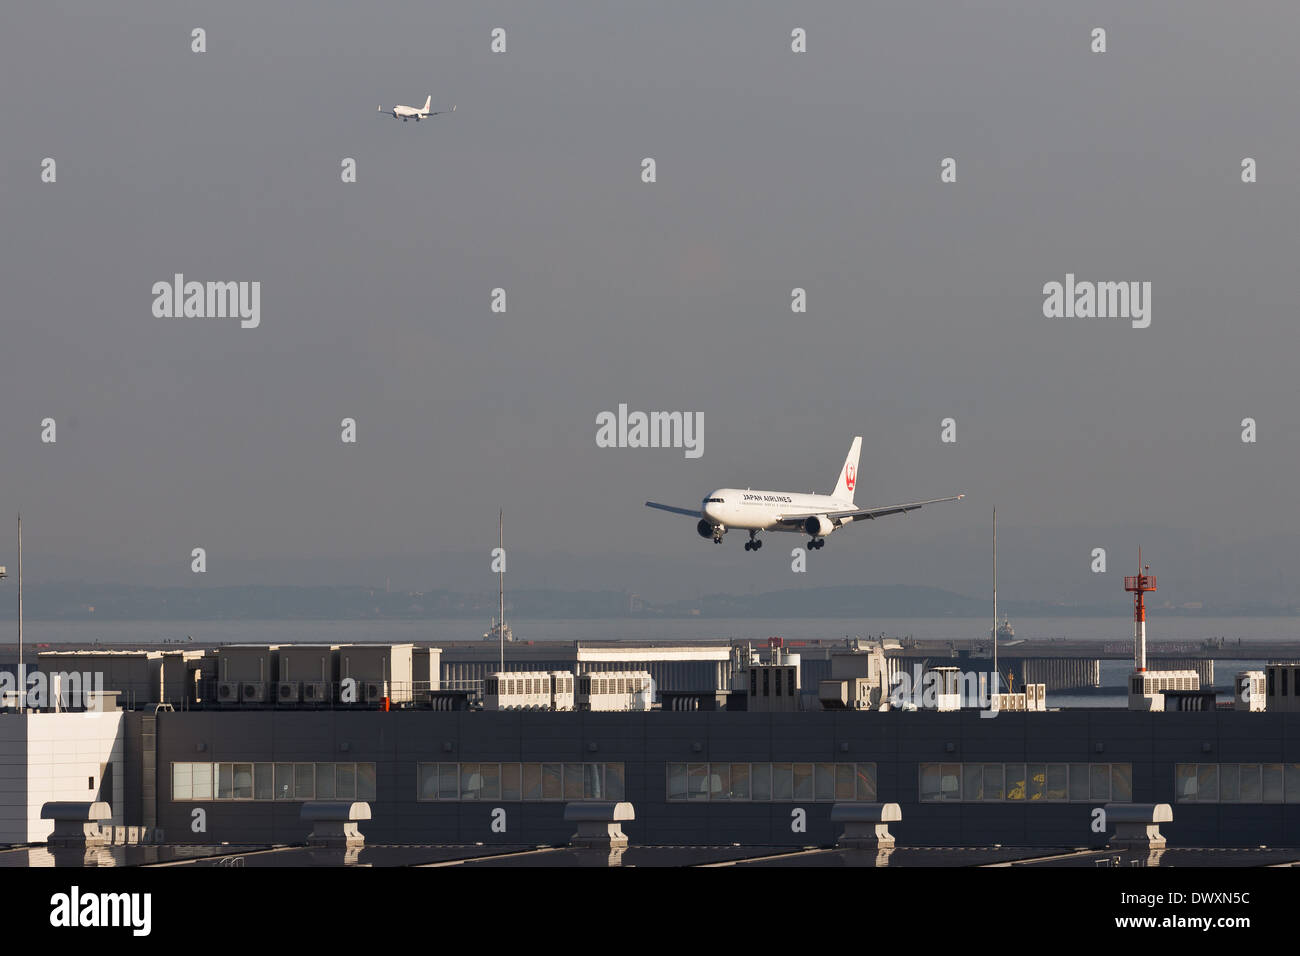 JAL departure at HANEDA airport Day Time Stock Photo